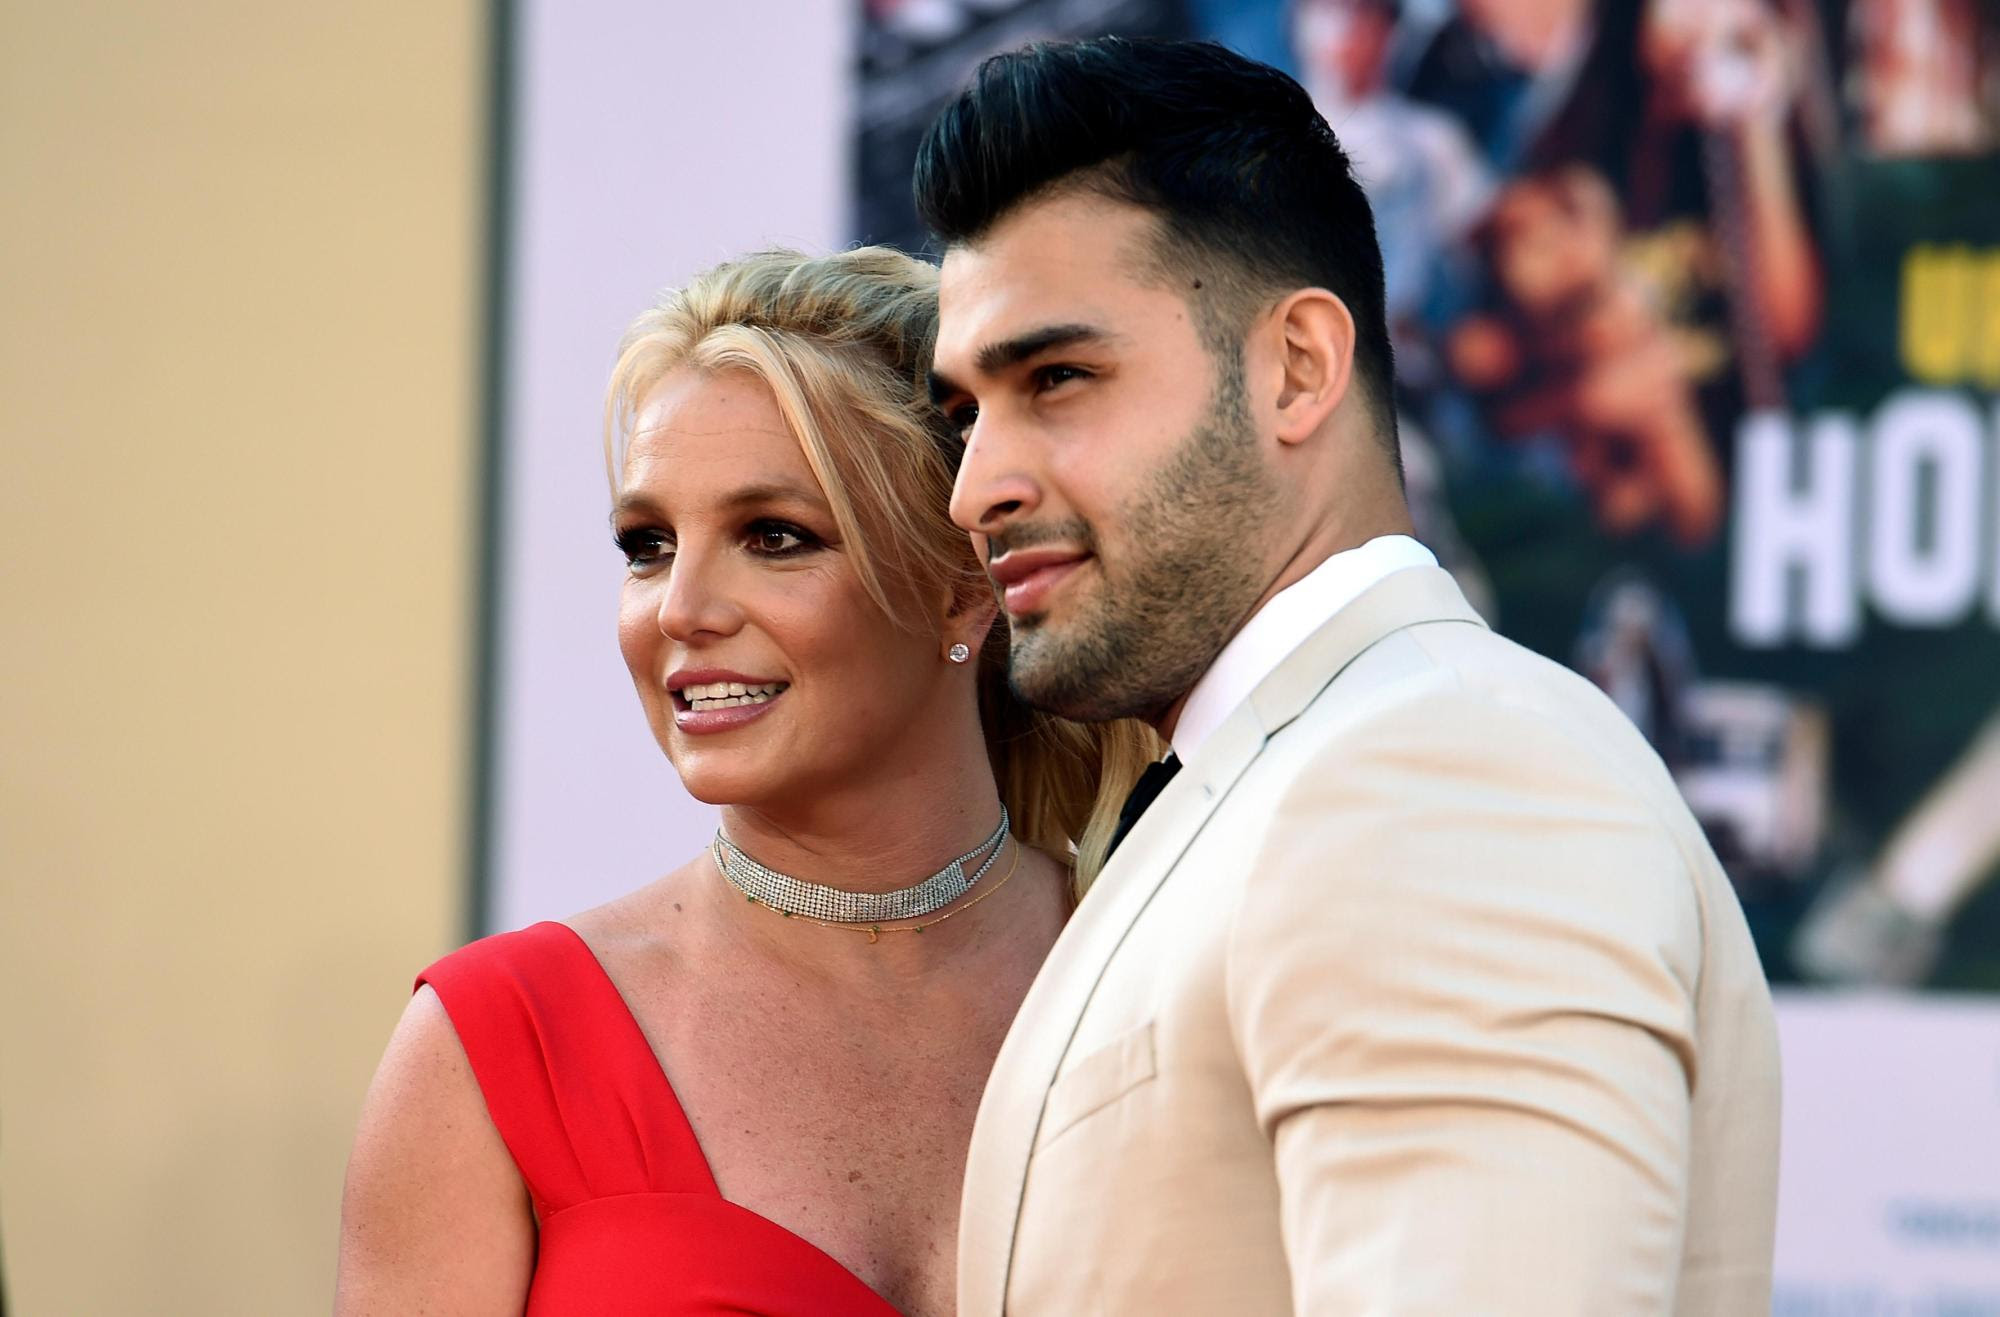 Britney Spears says she’s lost baby due to miscarriage